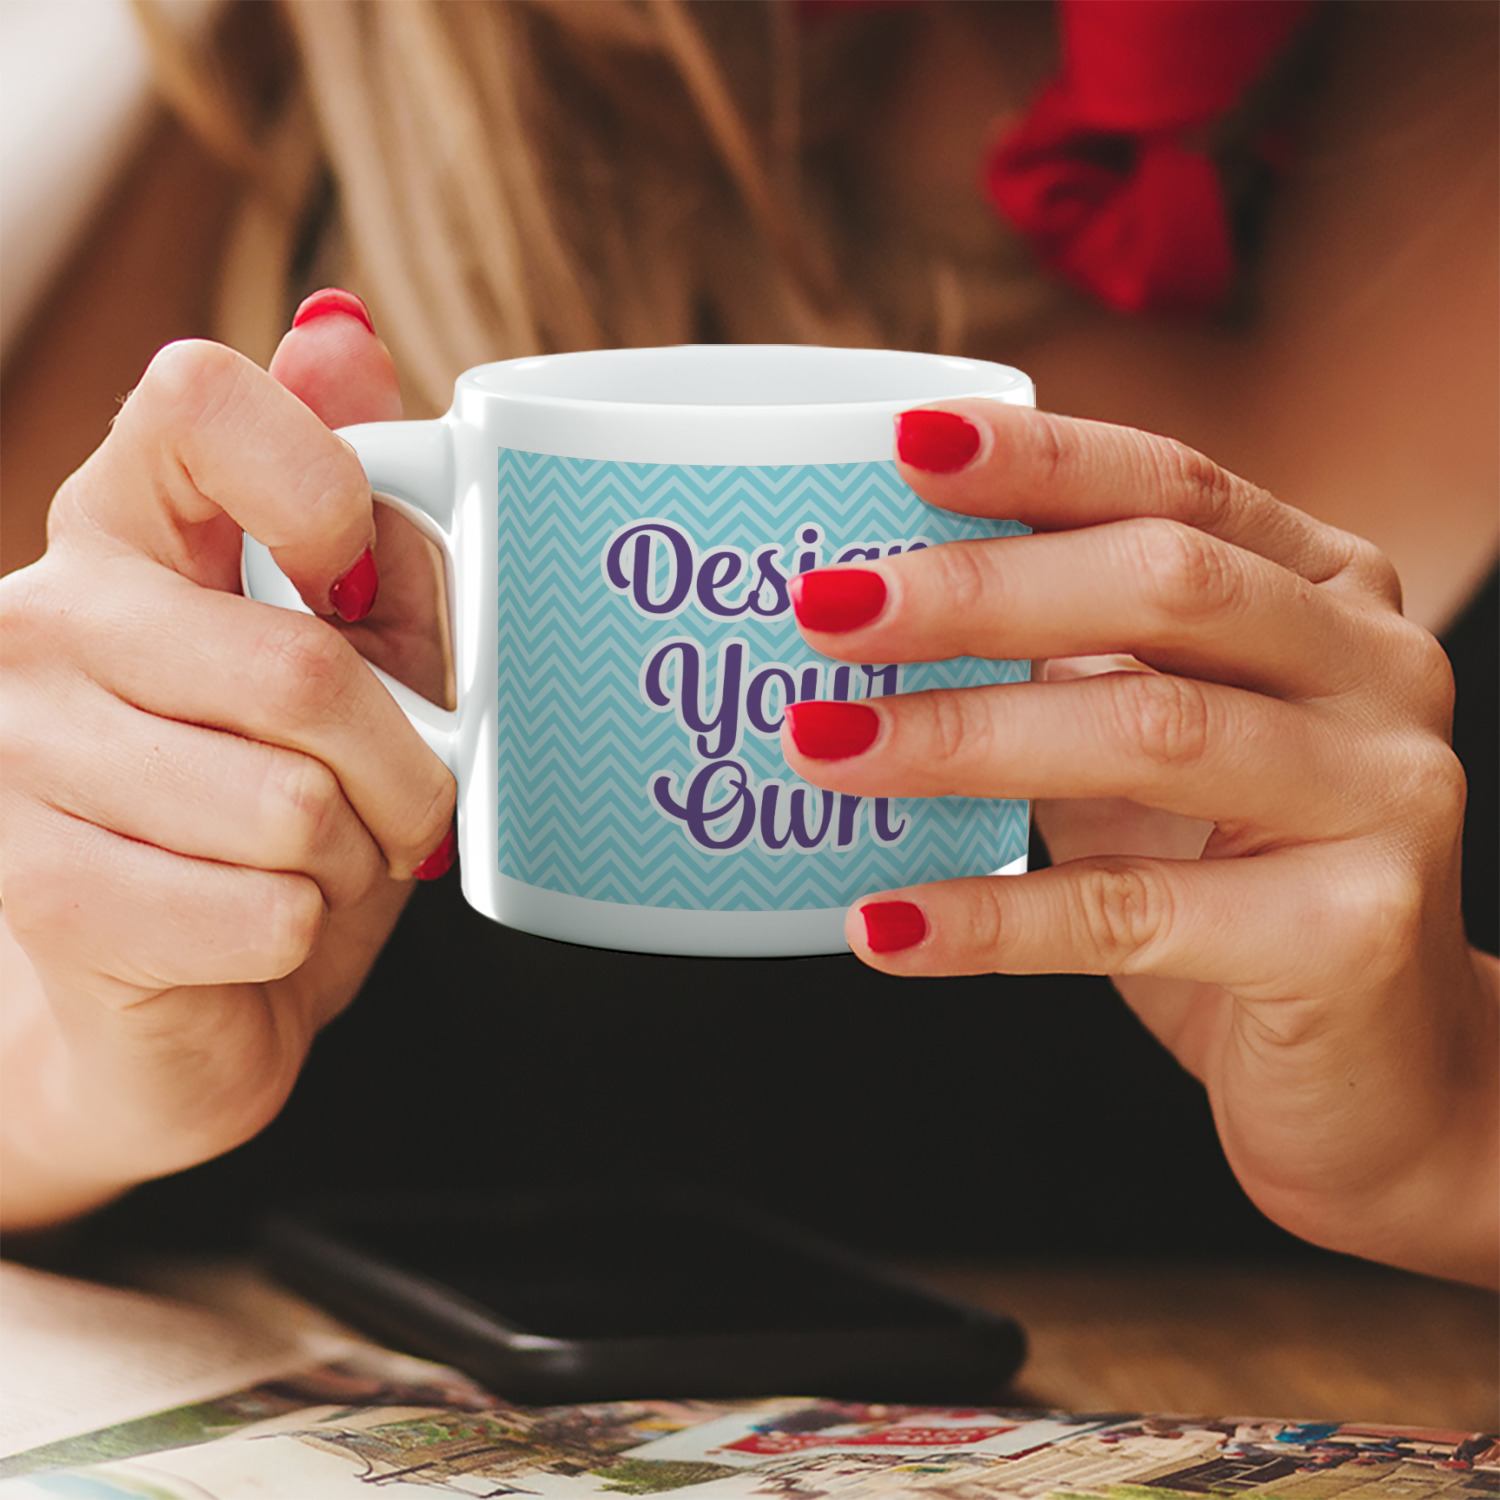 https://www.youcustomizeit.com/common/MAKE/965833/Design-Your-Own-Espresso-Cup-6oz-Double-Shot-LIFESTYLE-Woman-hands-cropped.jpg?lm=1666305756